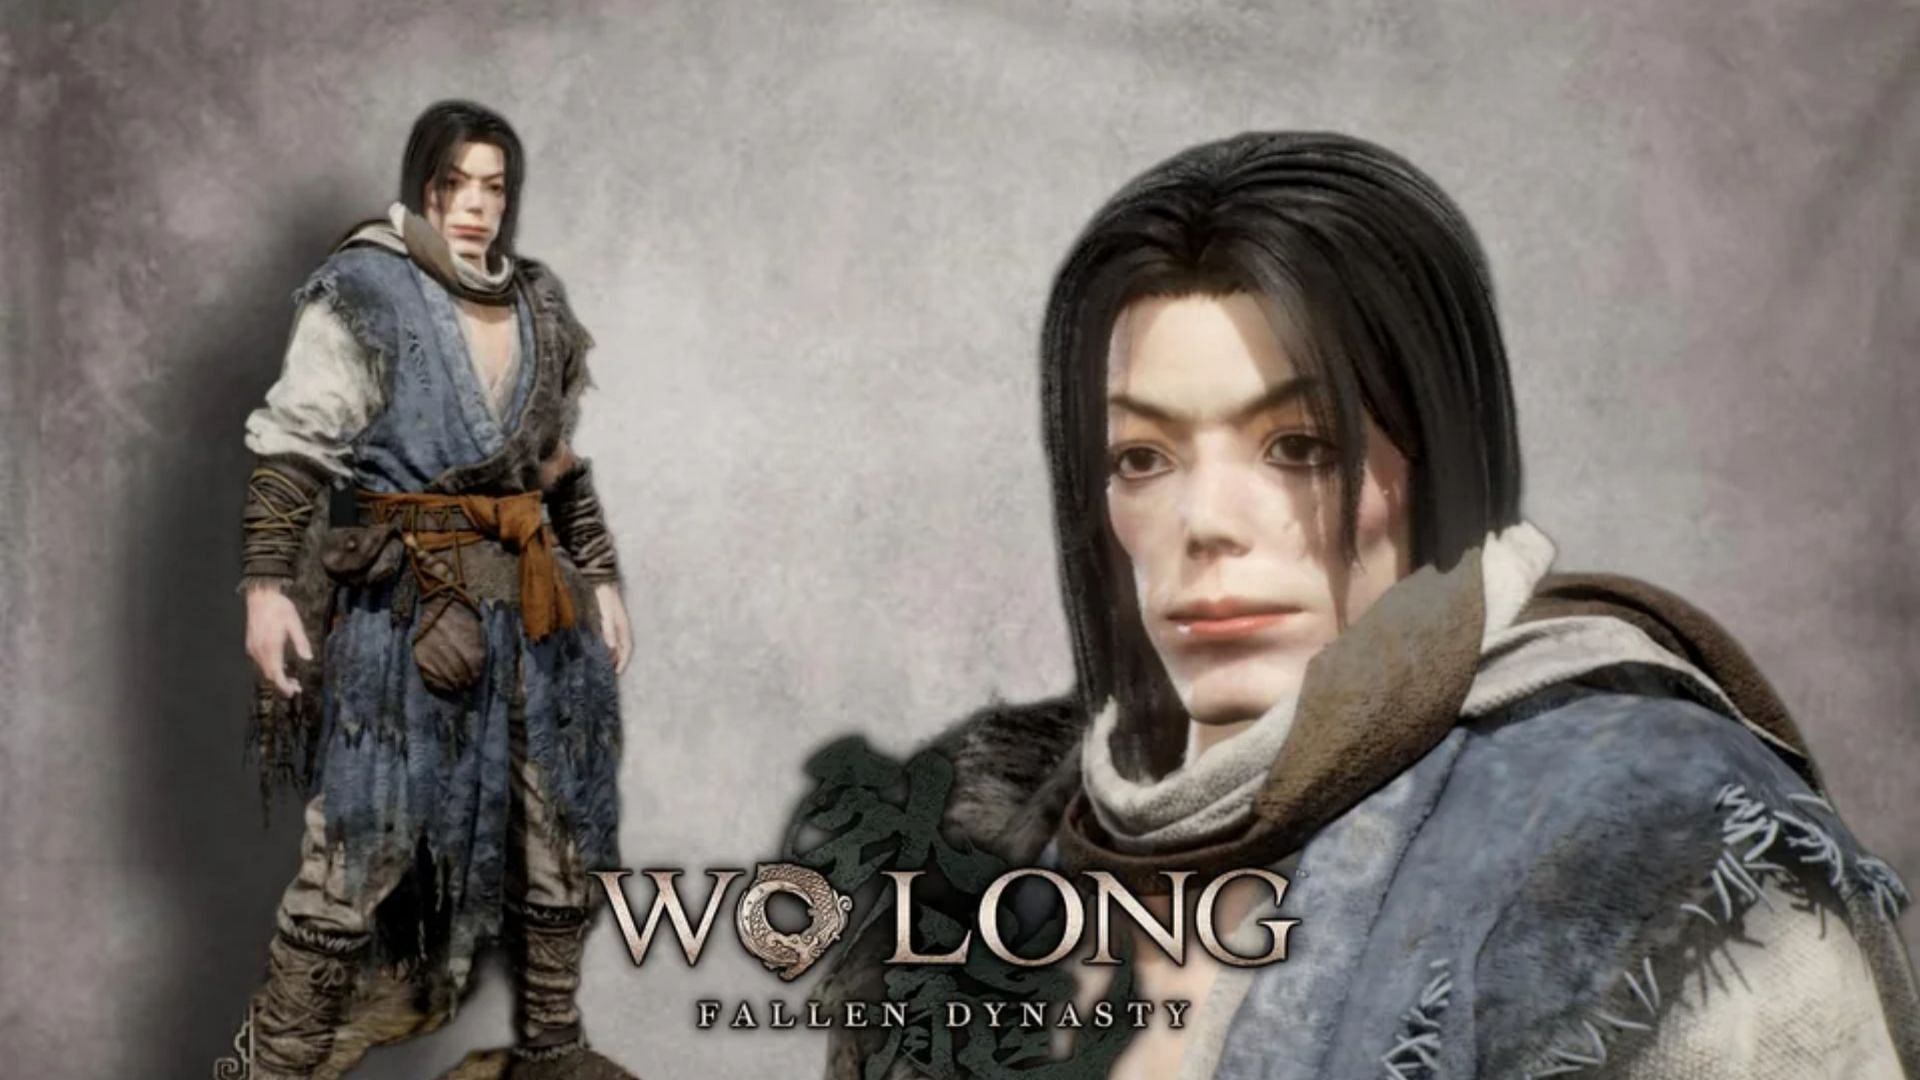 How To Use Cheat Codes in Wo Long Fallen Dynasty, Cheats in Wo Long